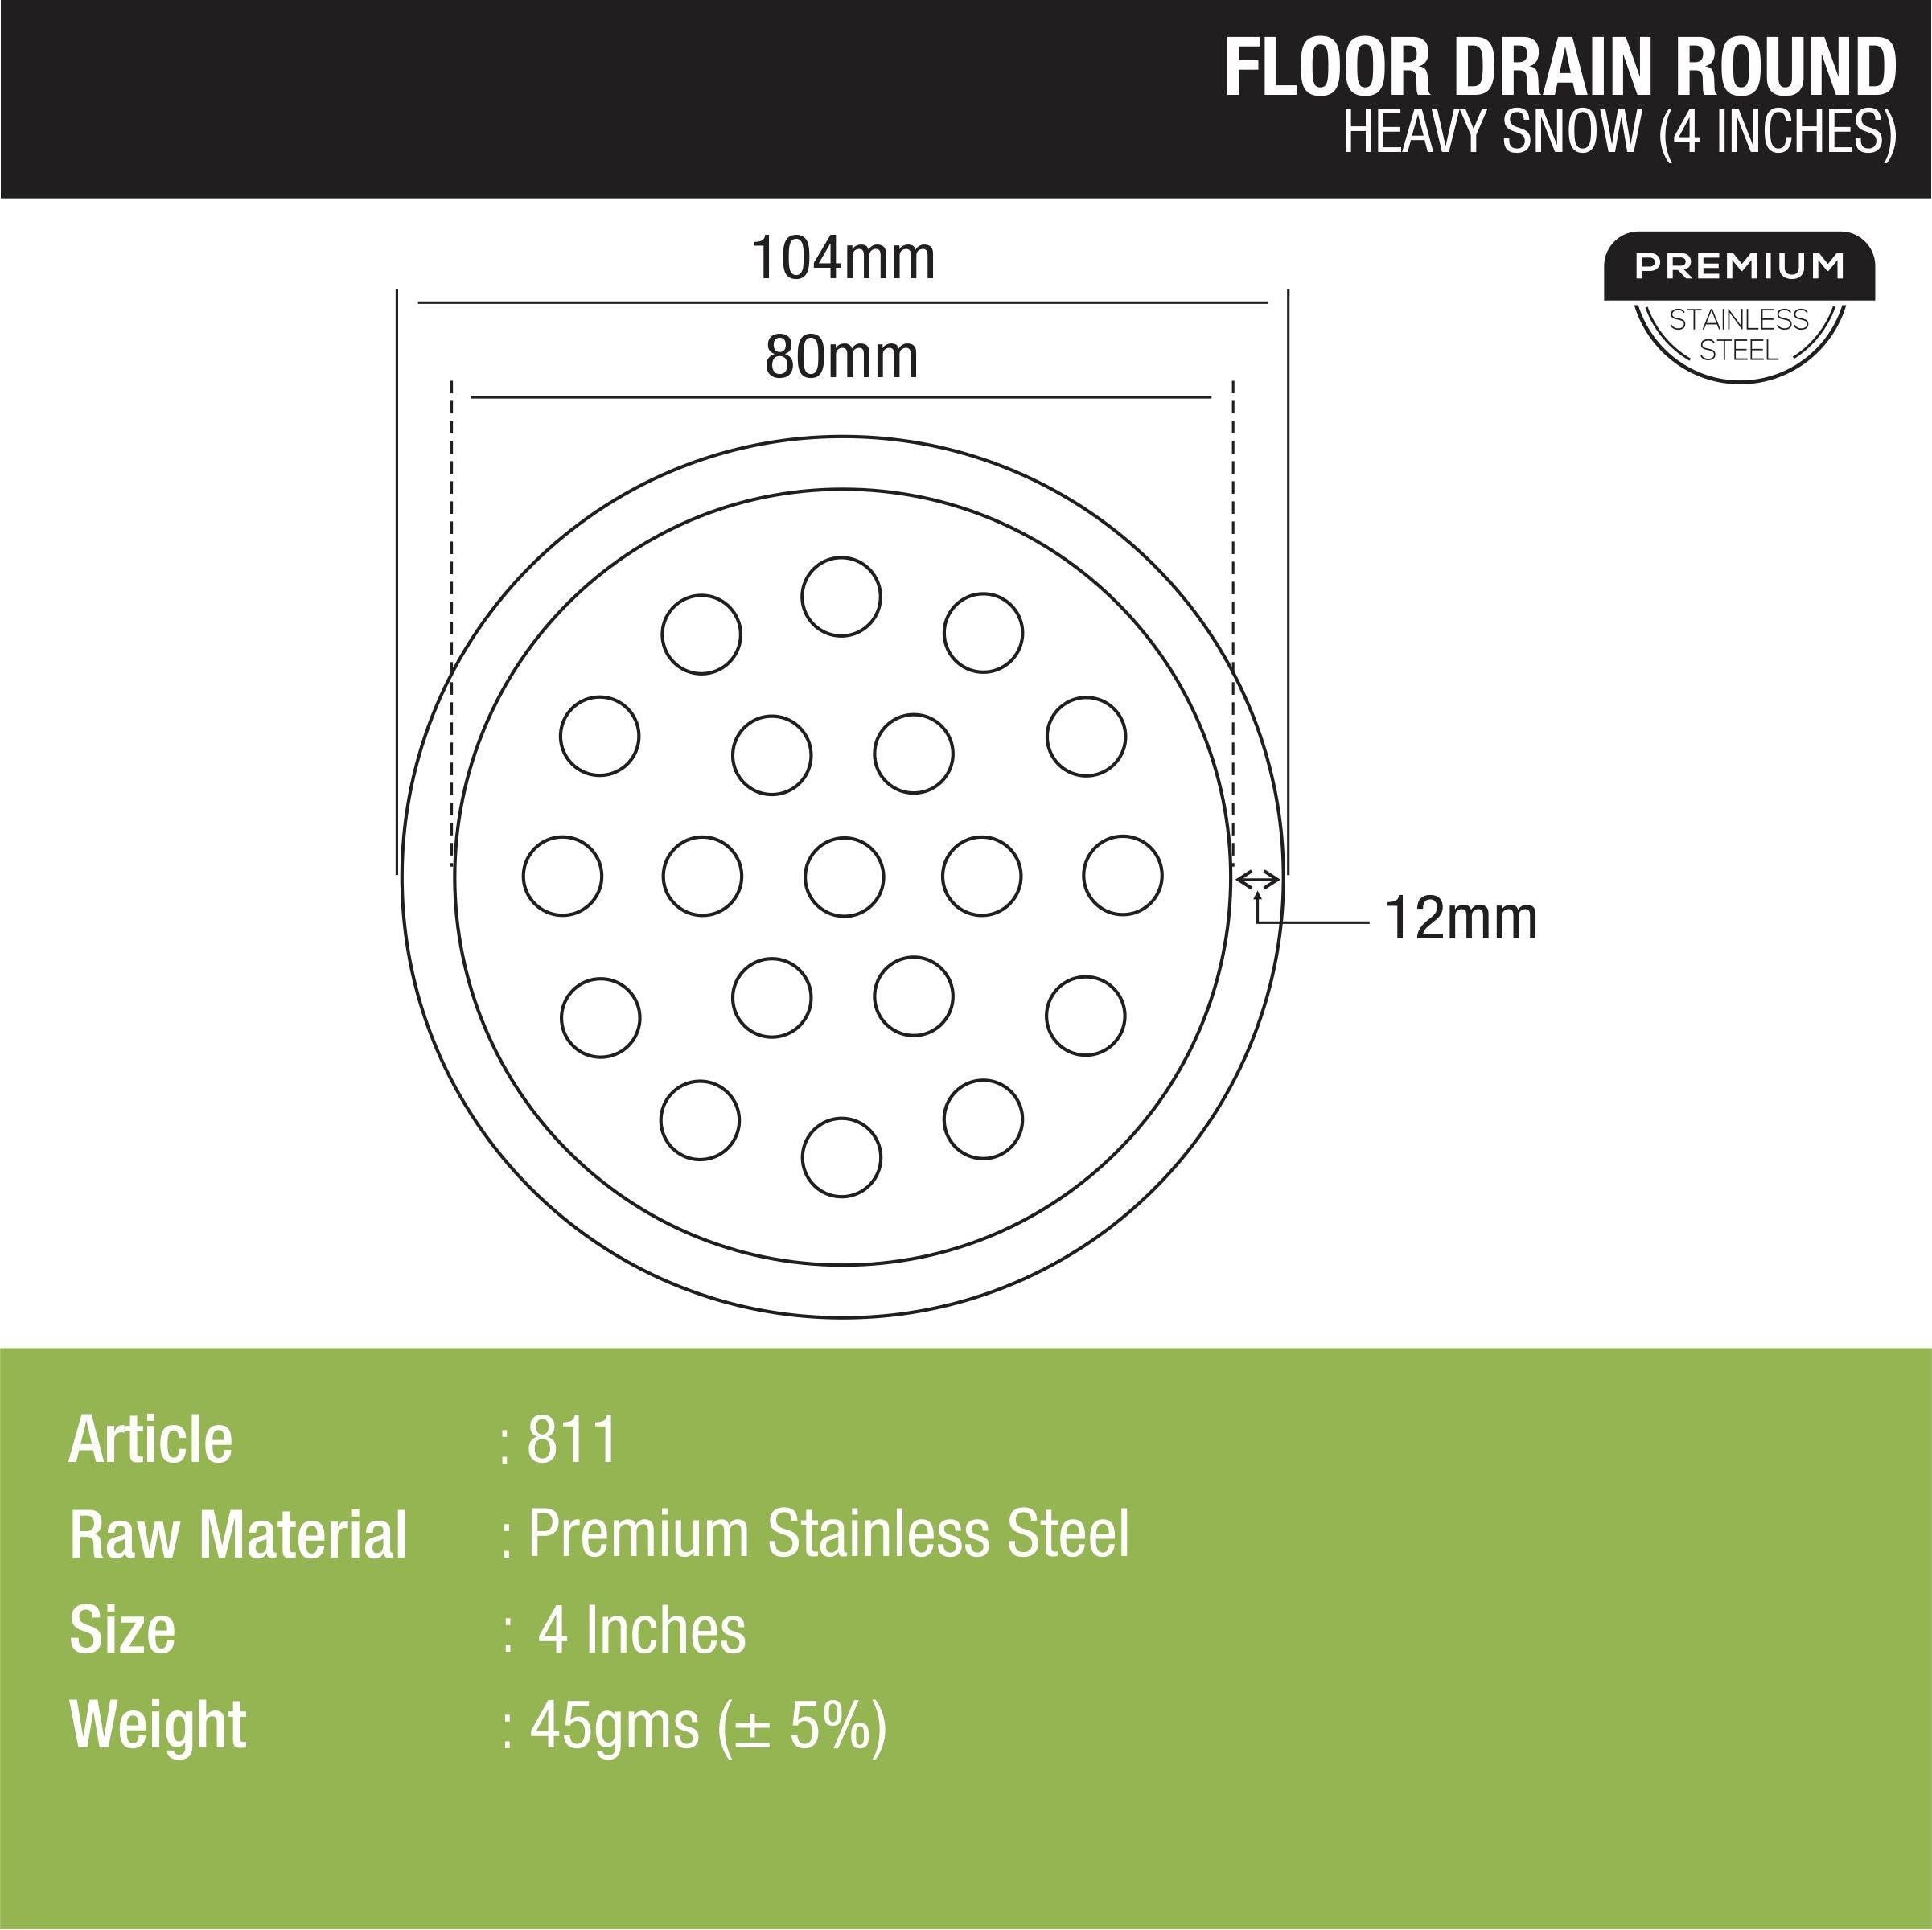 Heavy Snow Round Floor Drain (4 Inches) dimensions and sizes